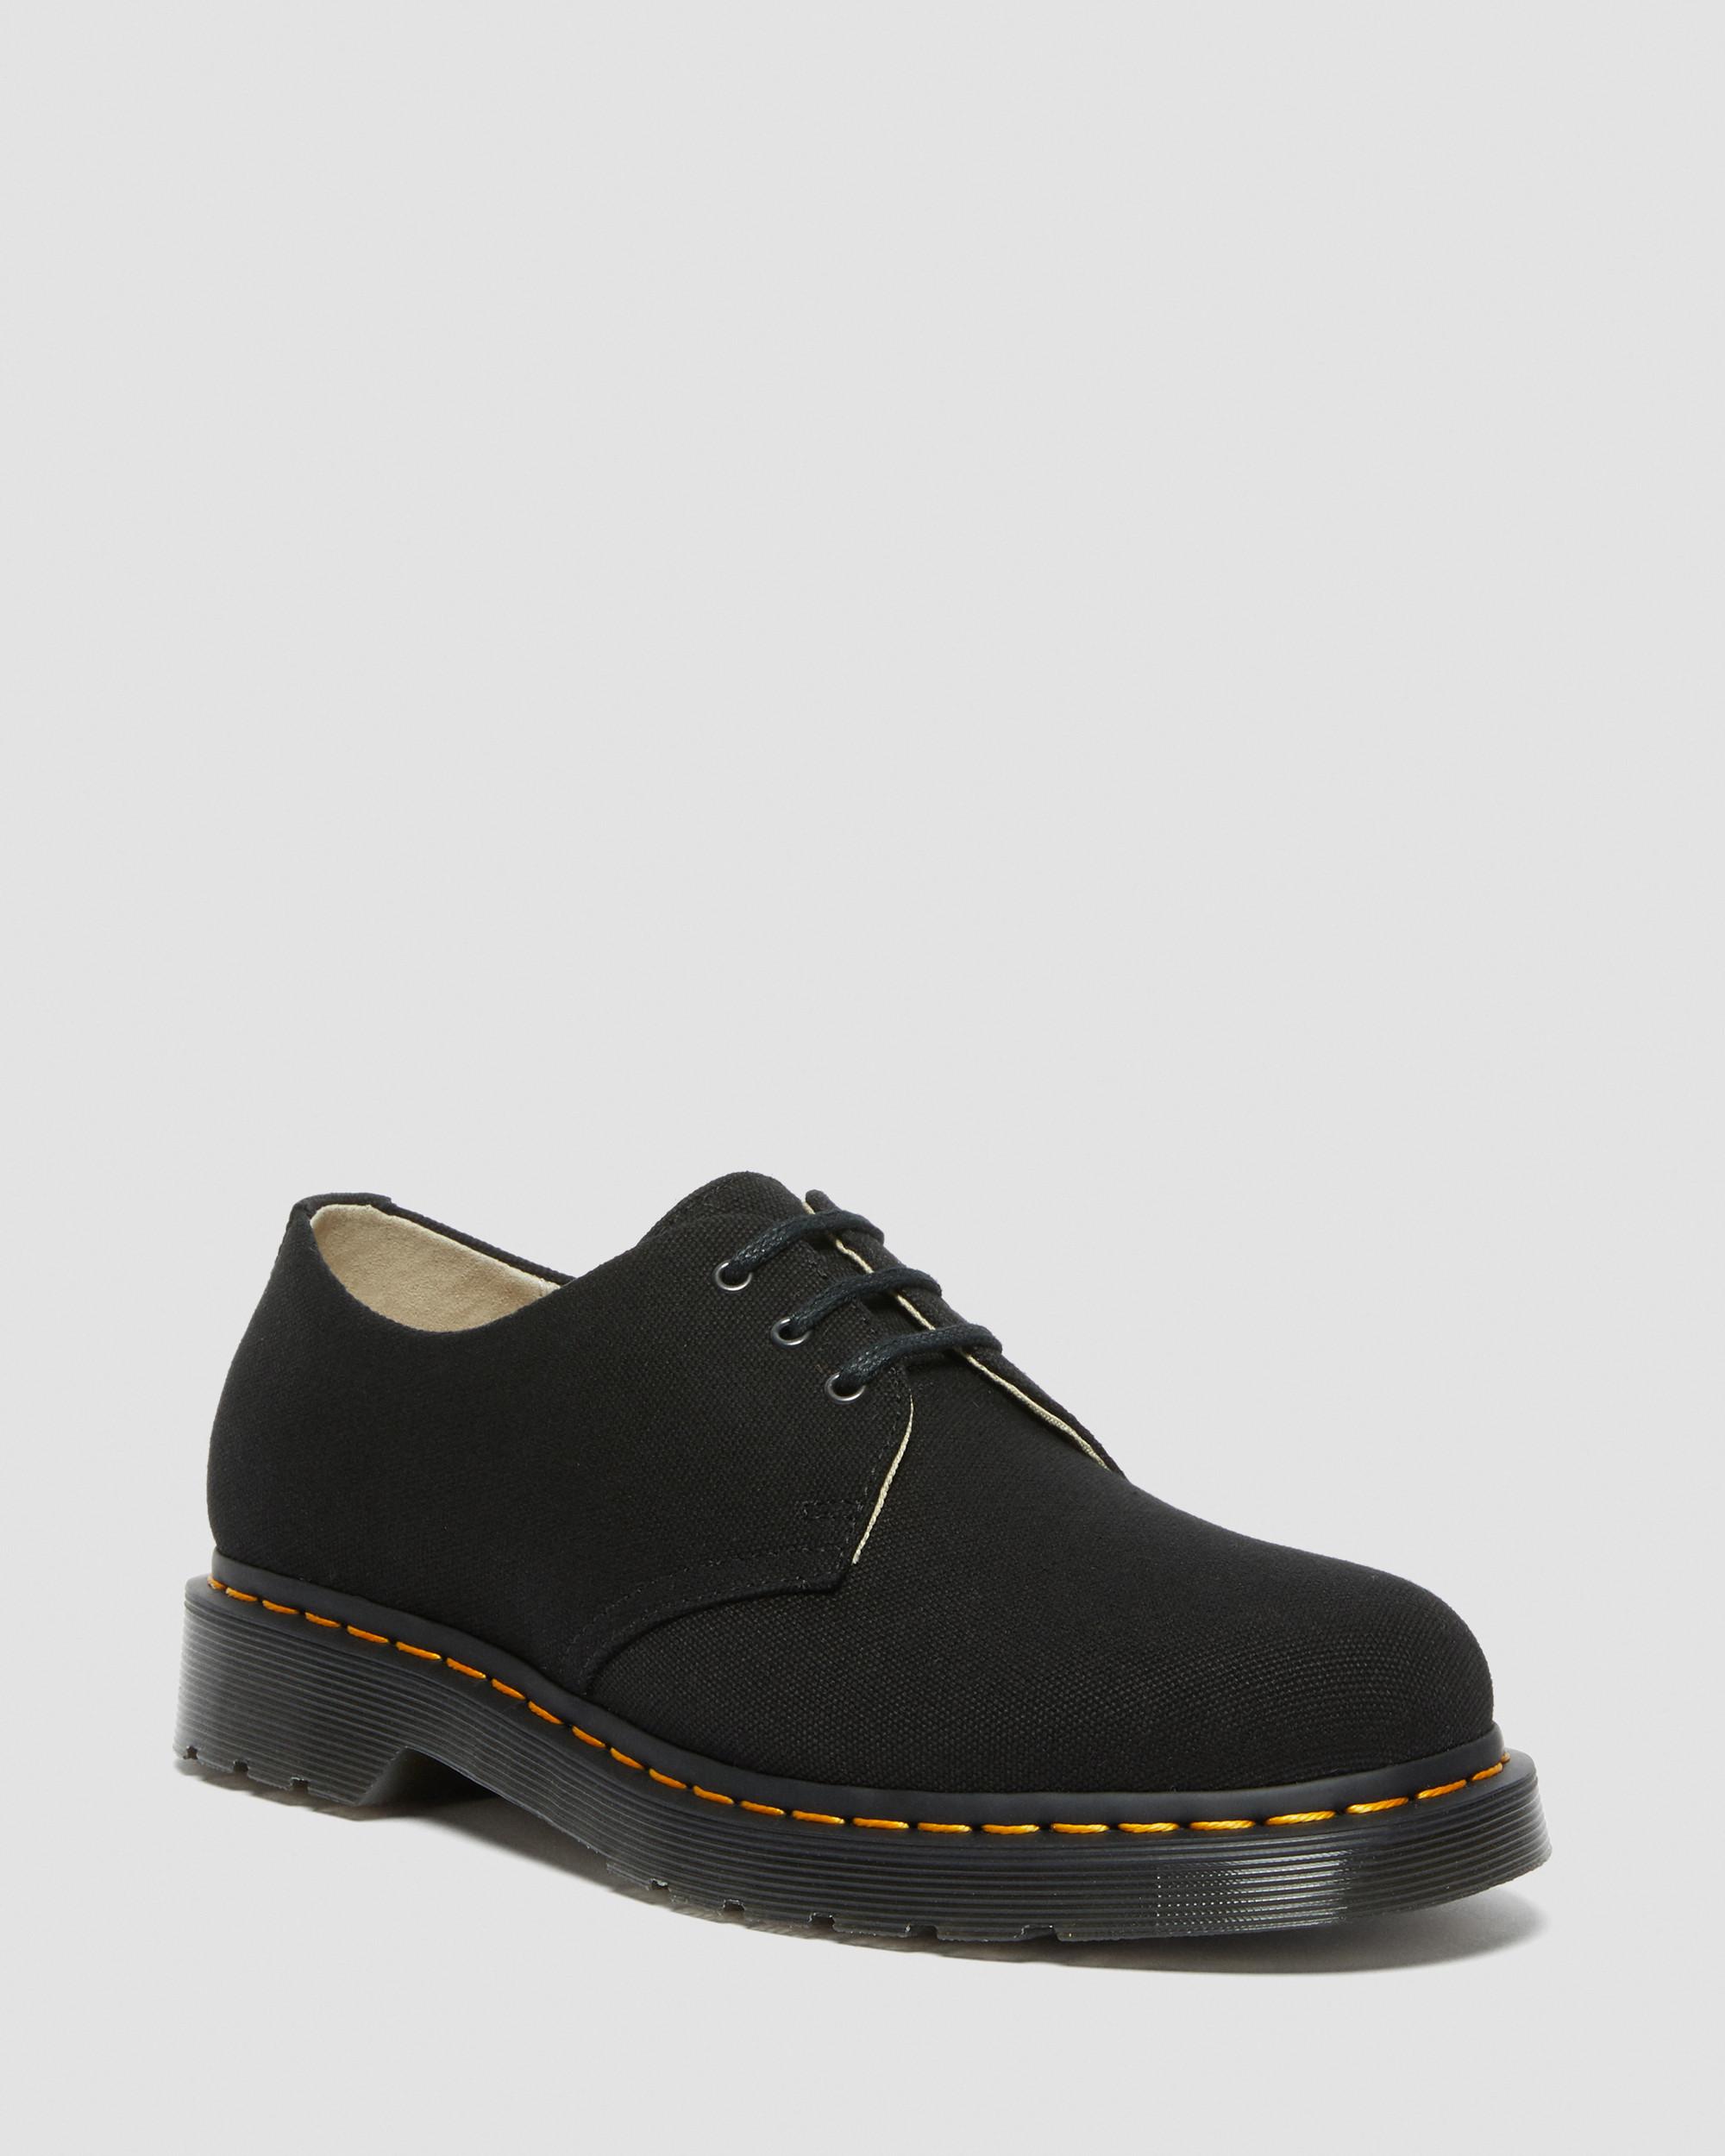 1461 Canvas Oxford Shoes in Black | Dr. Martens